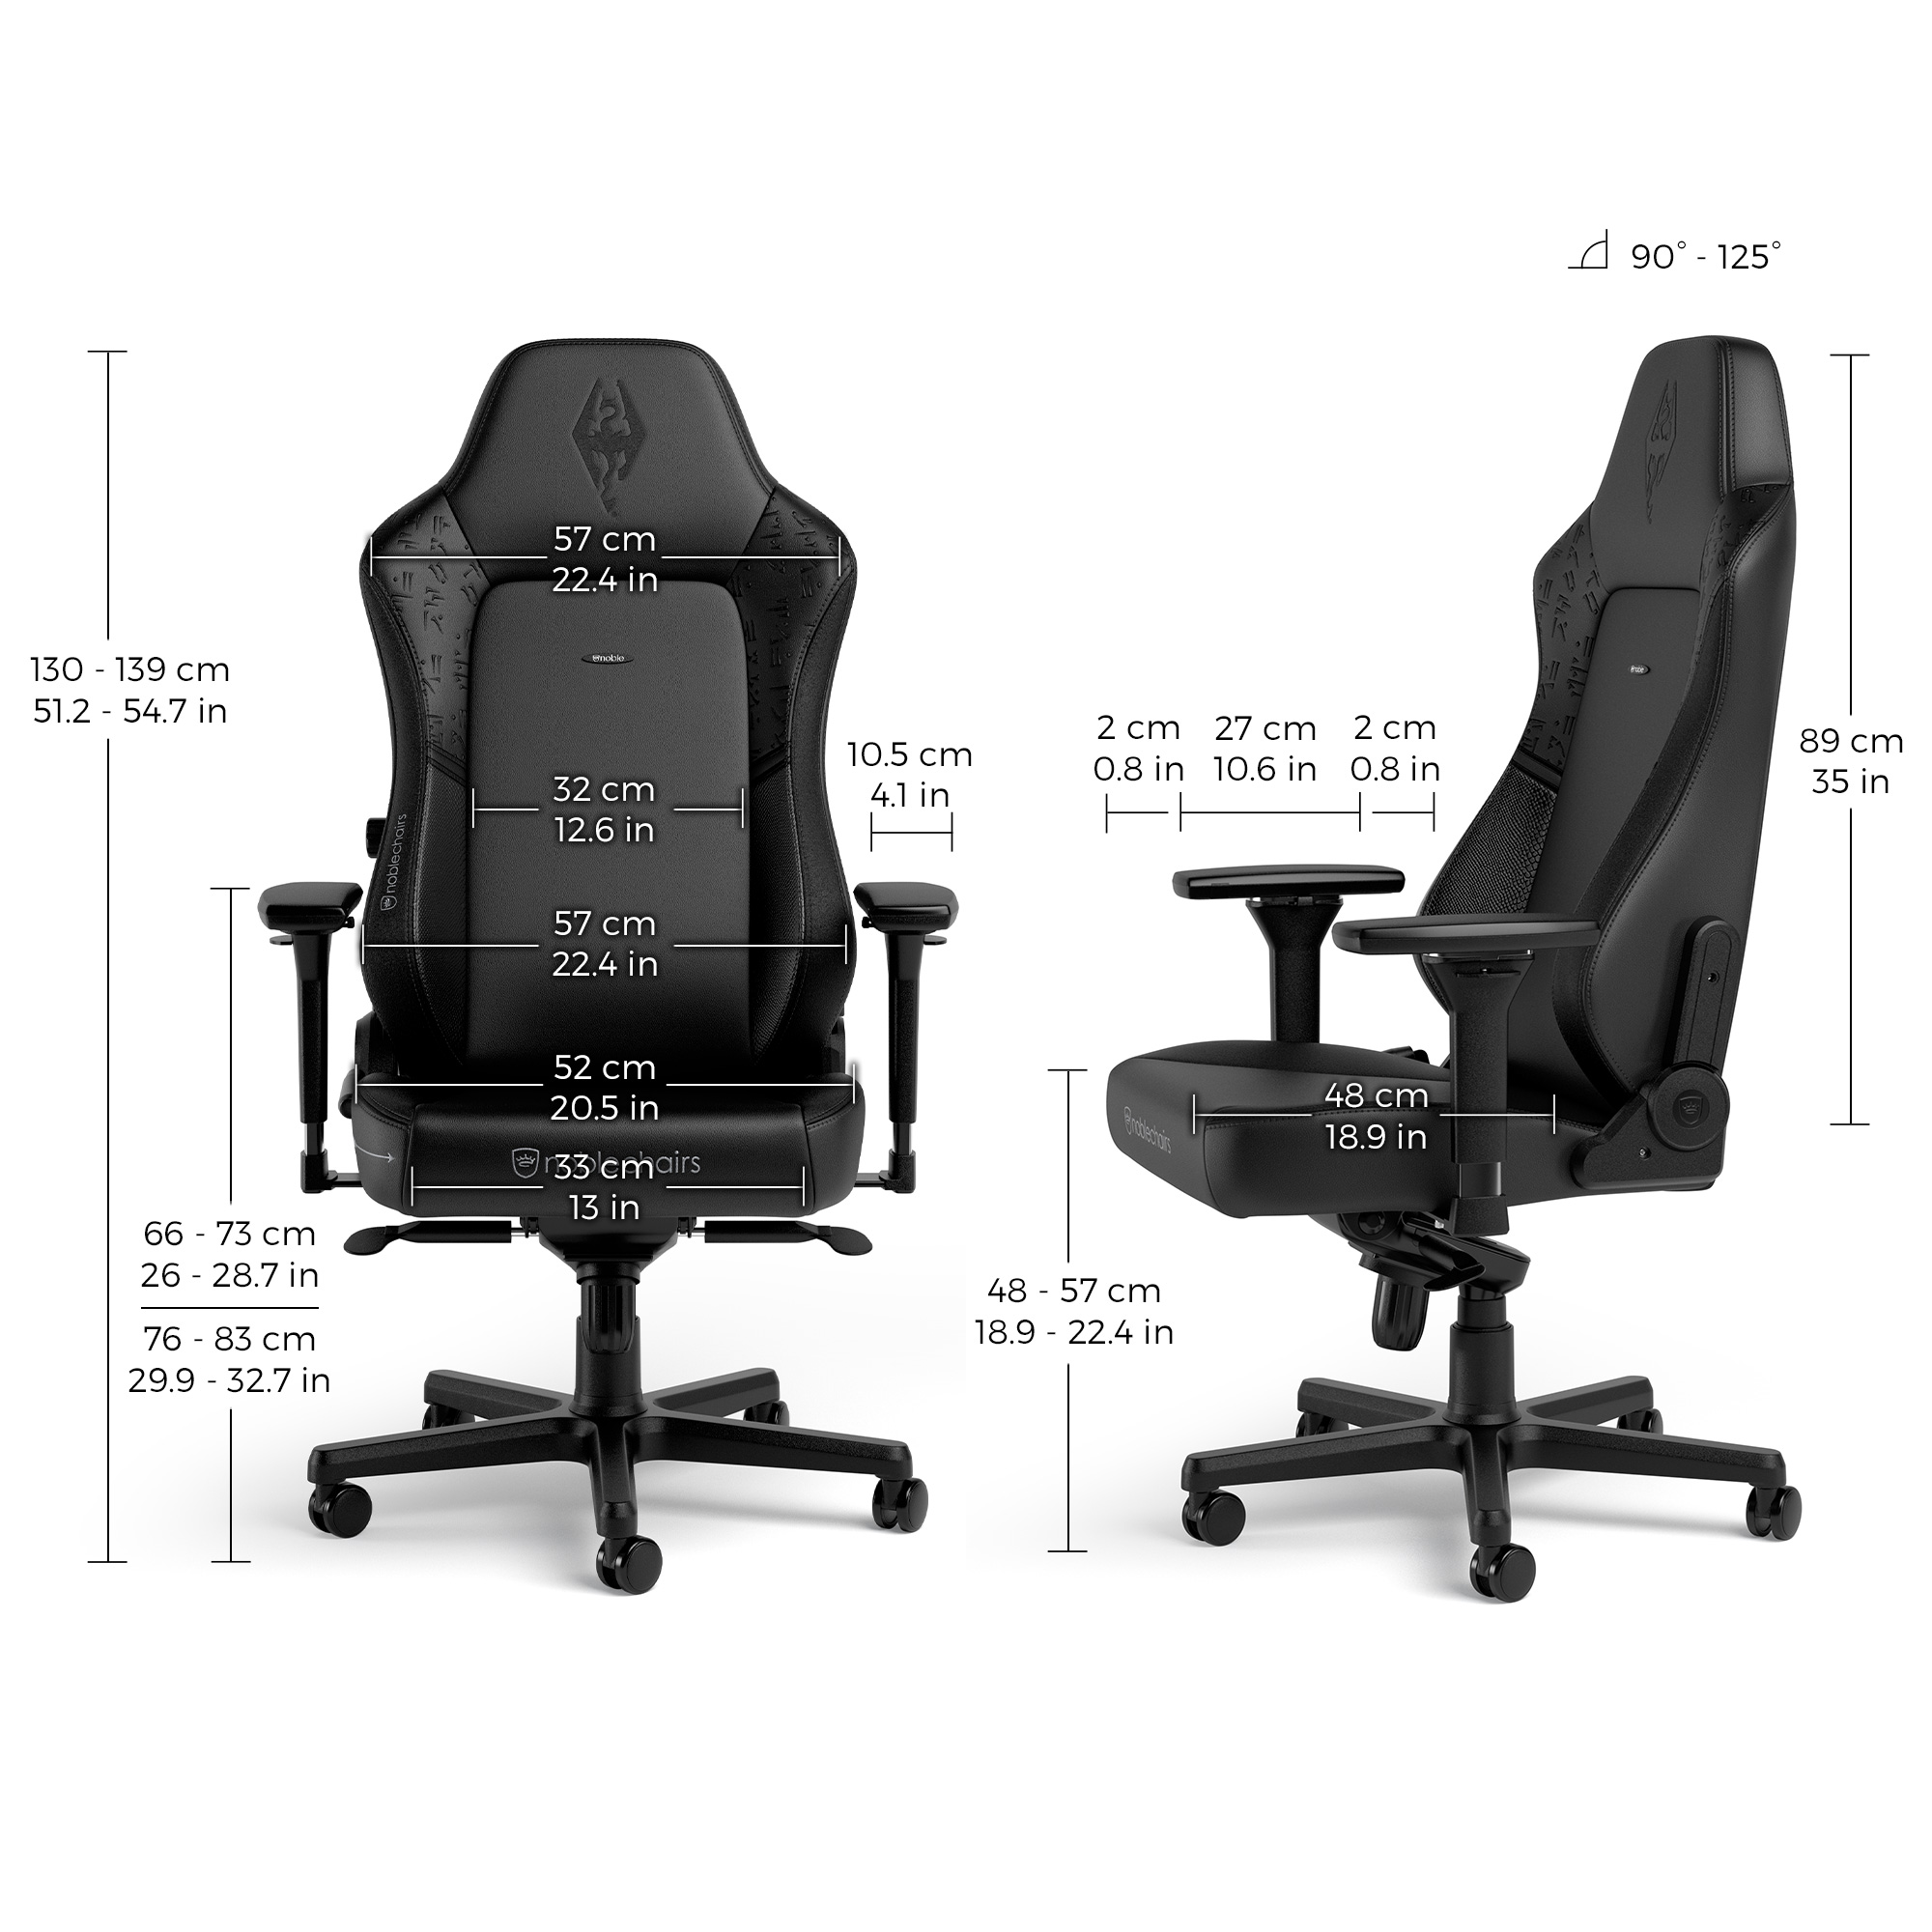 noblechairs - noblechairs HERO Gaming Chair The Elder Scrolls V: Skyrim 10th Anniversary Edition